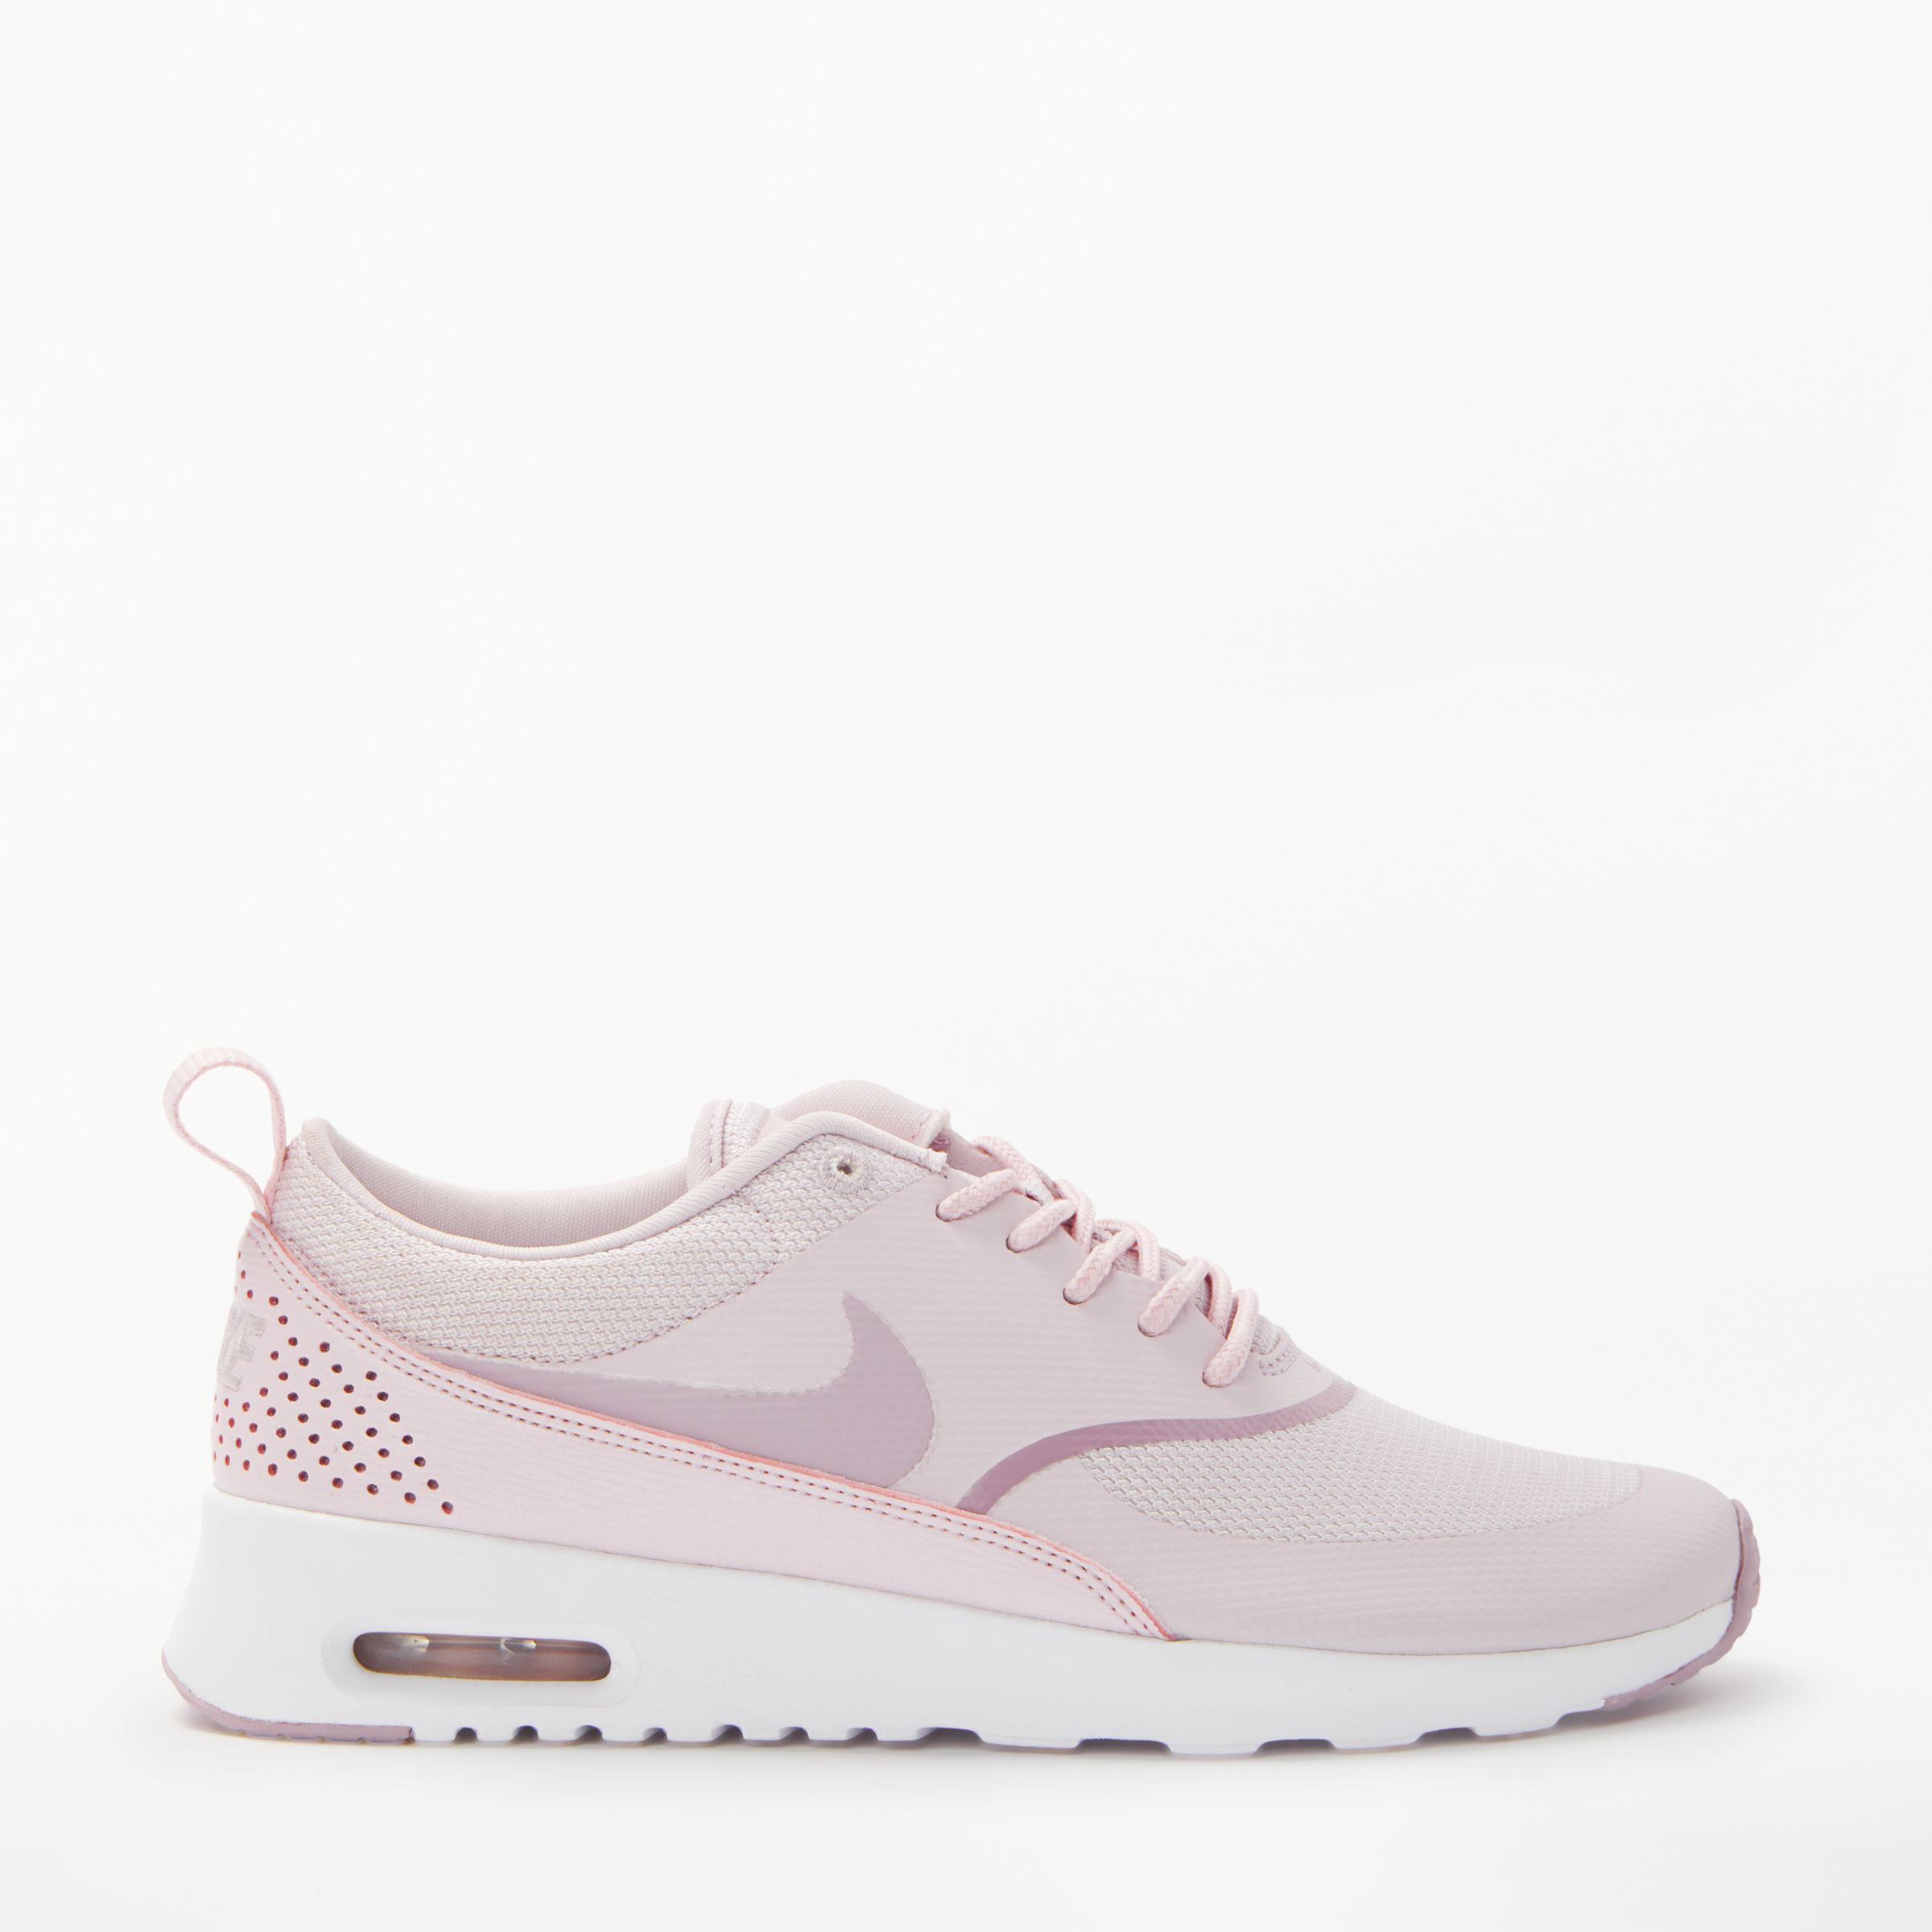 Nike Air Max Thea Women's Trainers